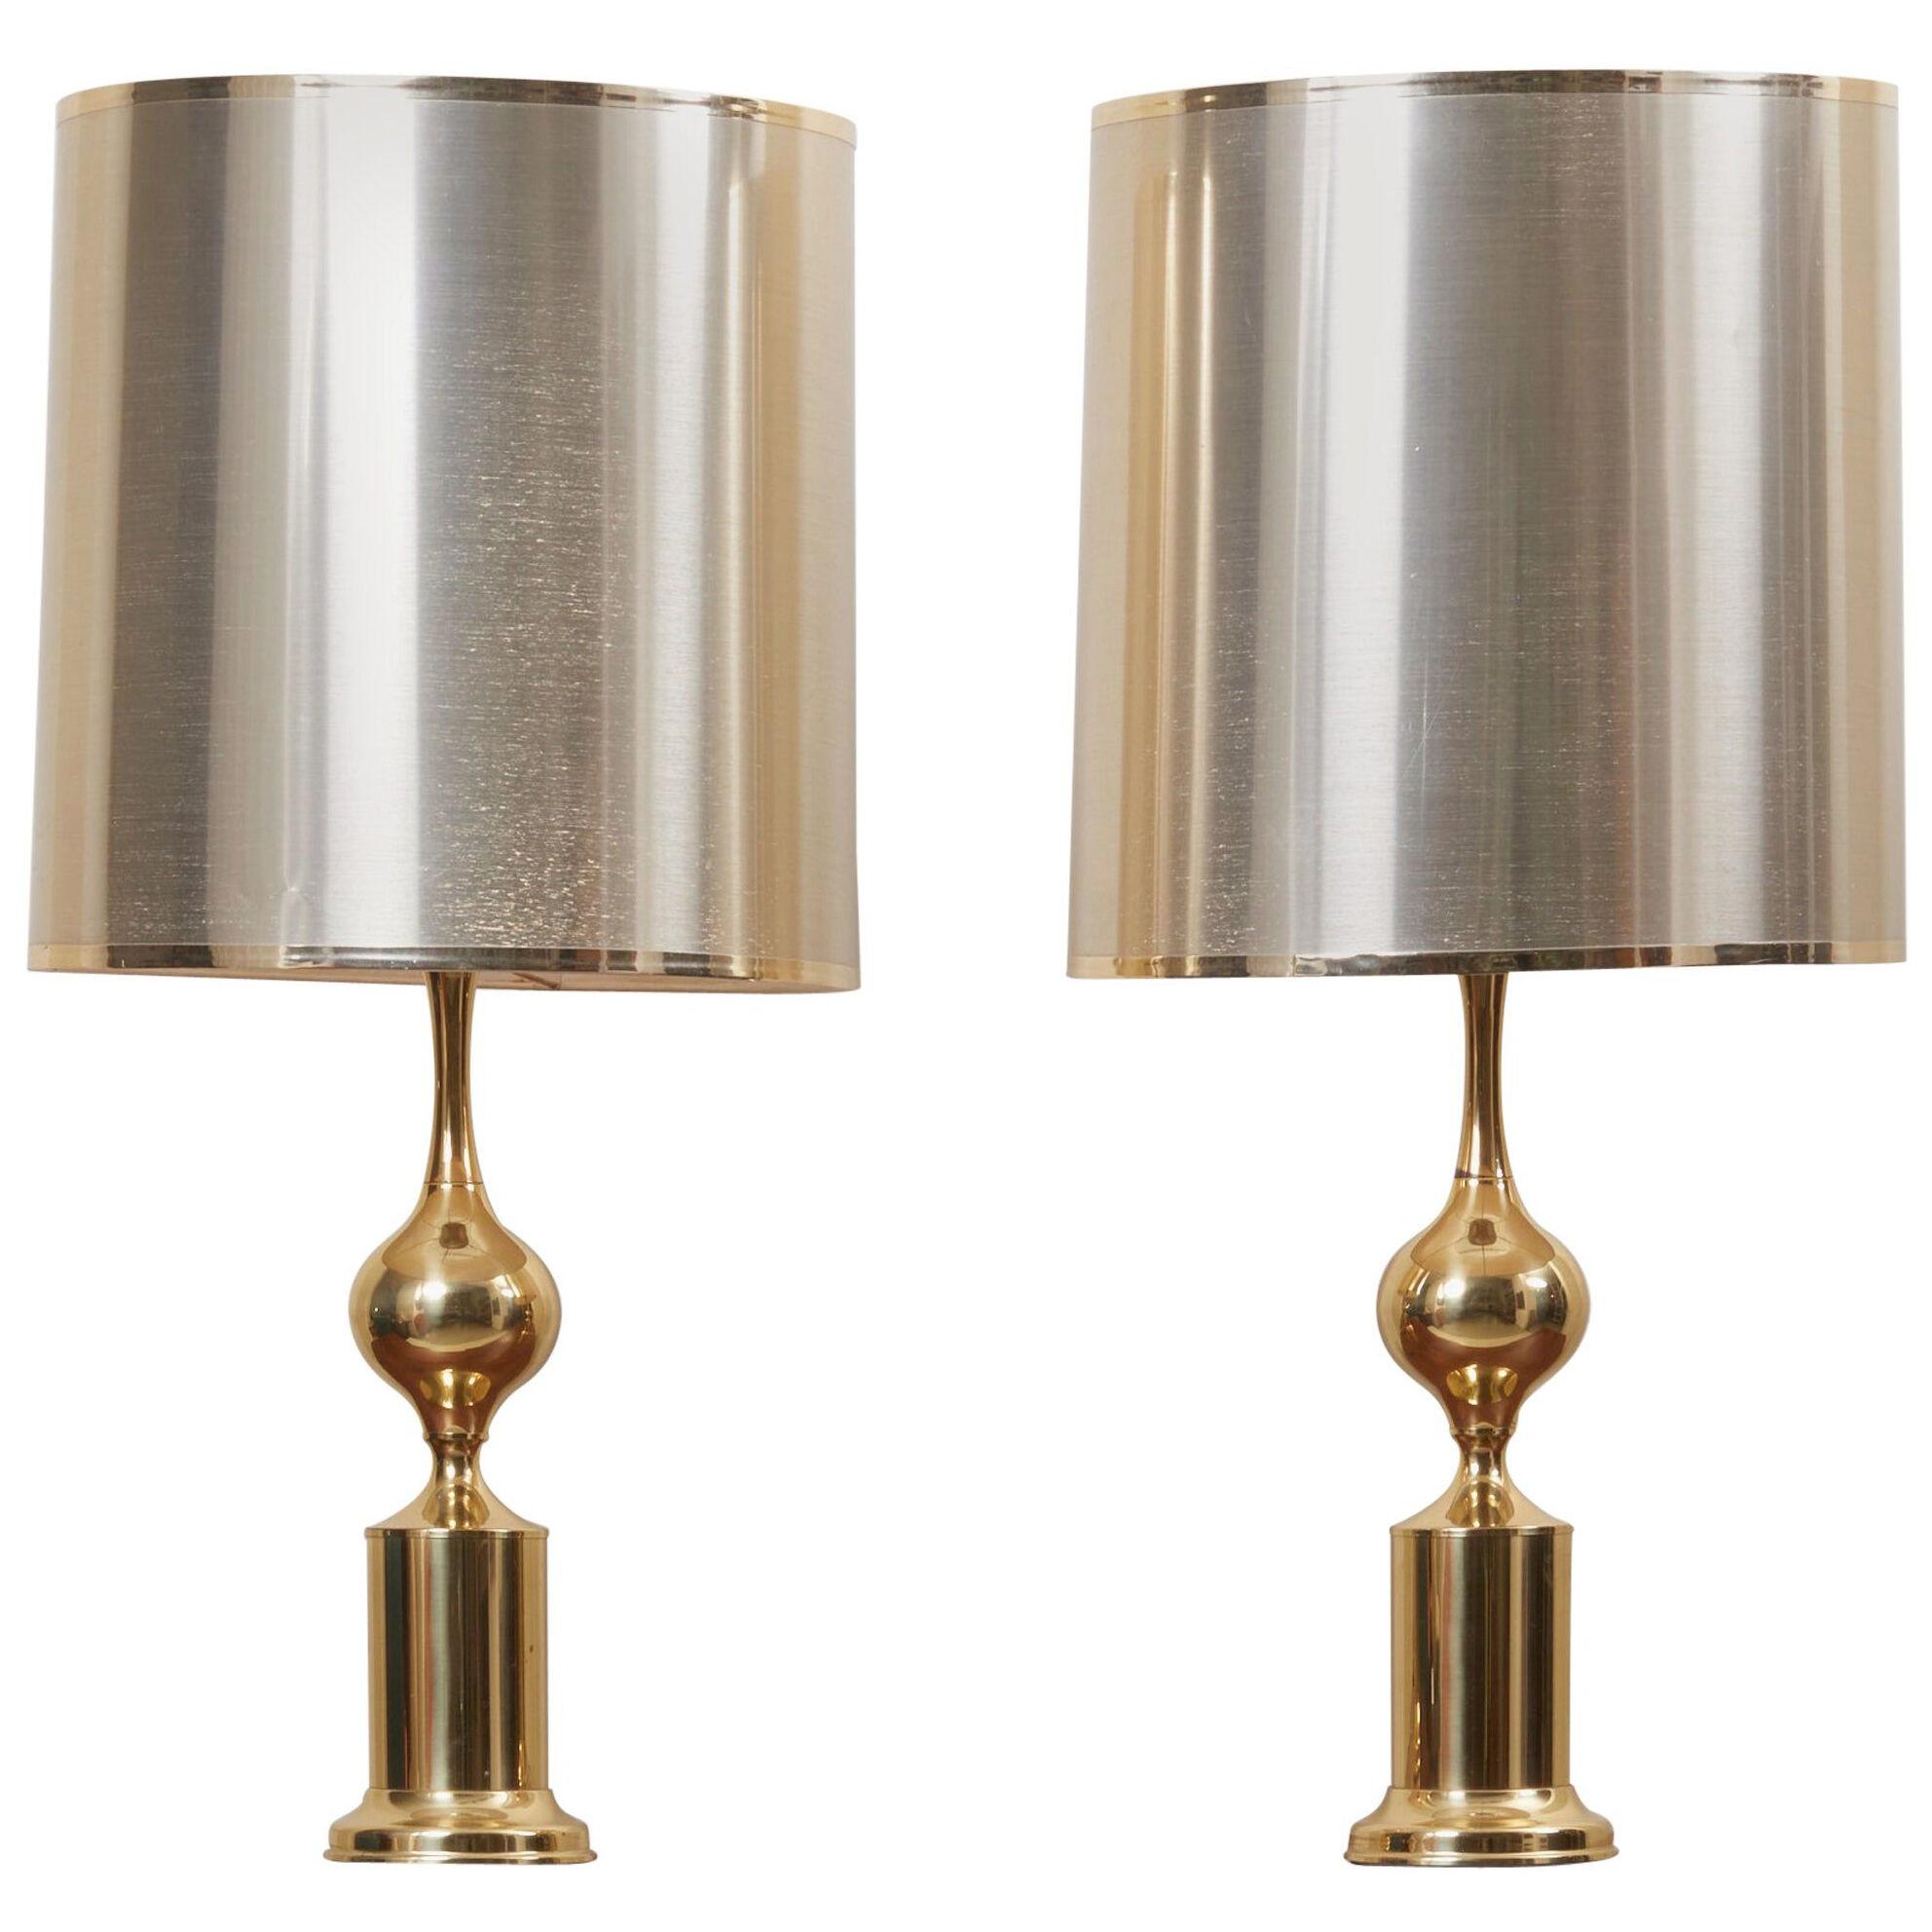 Huge Pair of Hollywood Regency Design Table Lamps in Brass with Metallic Shade	